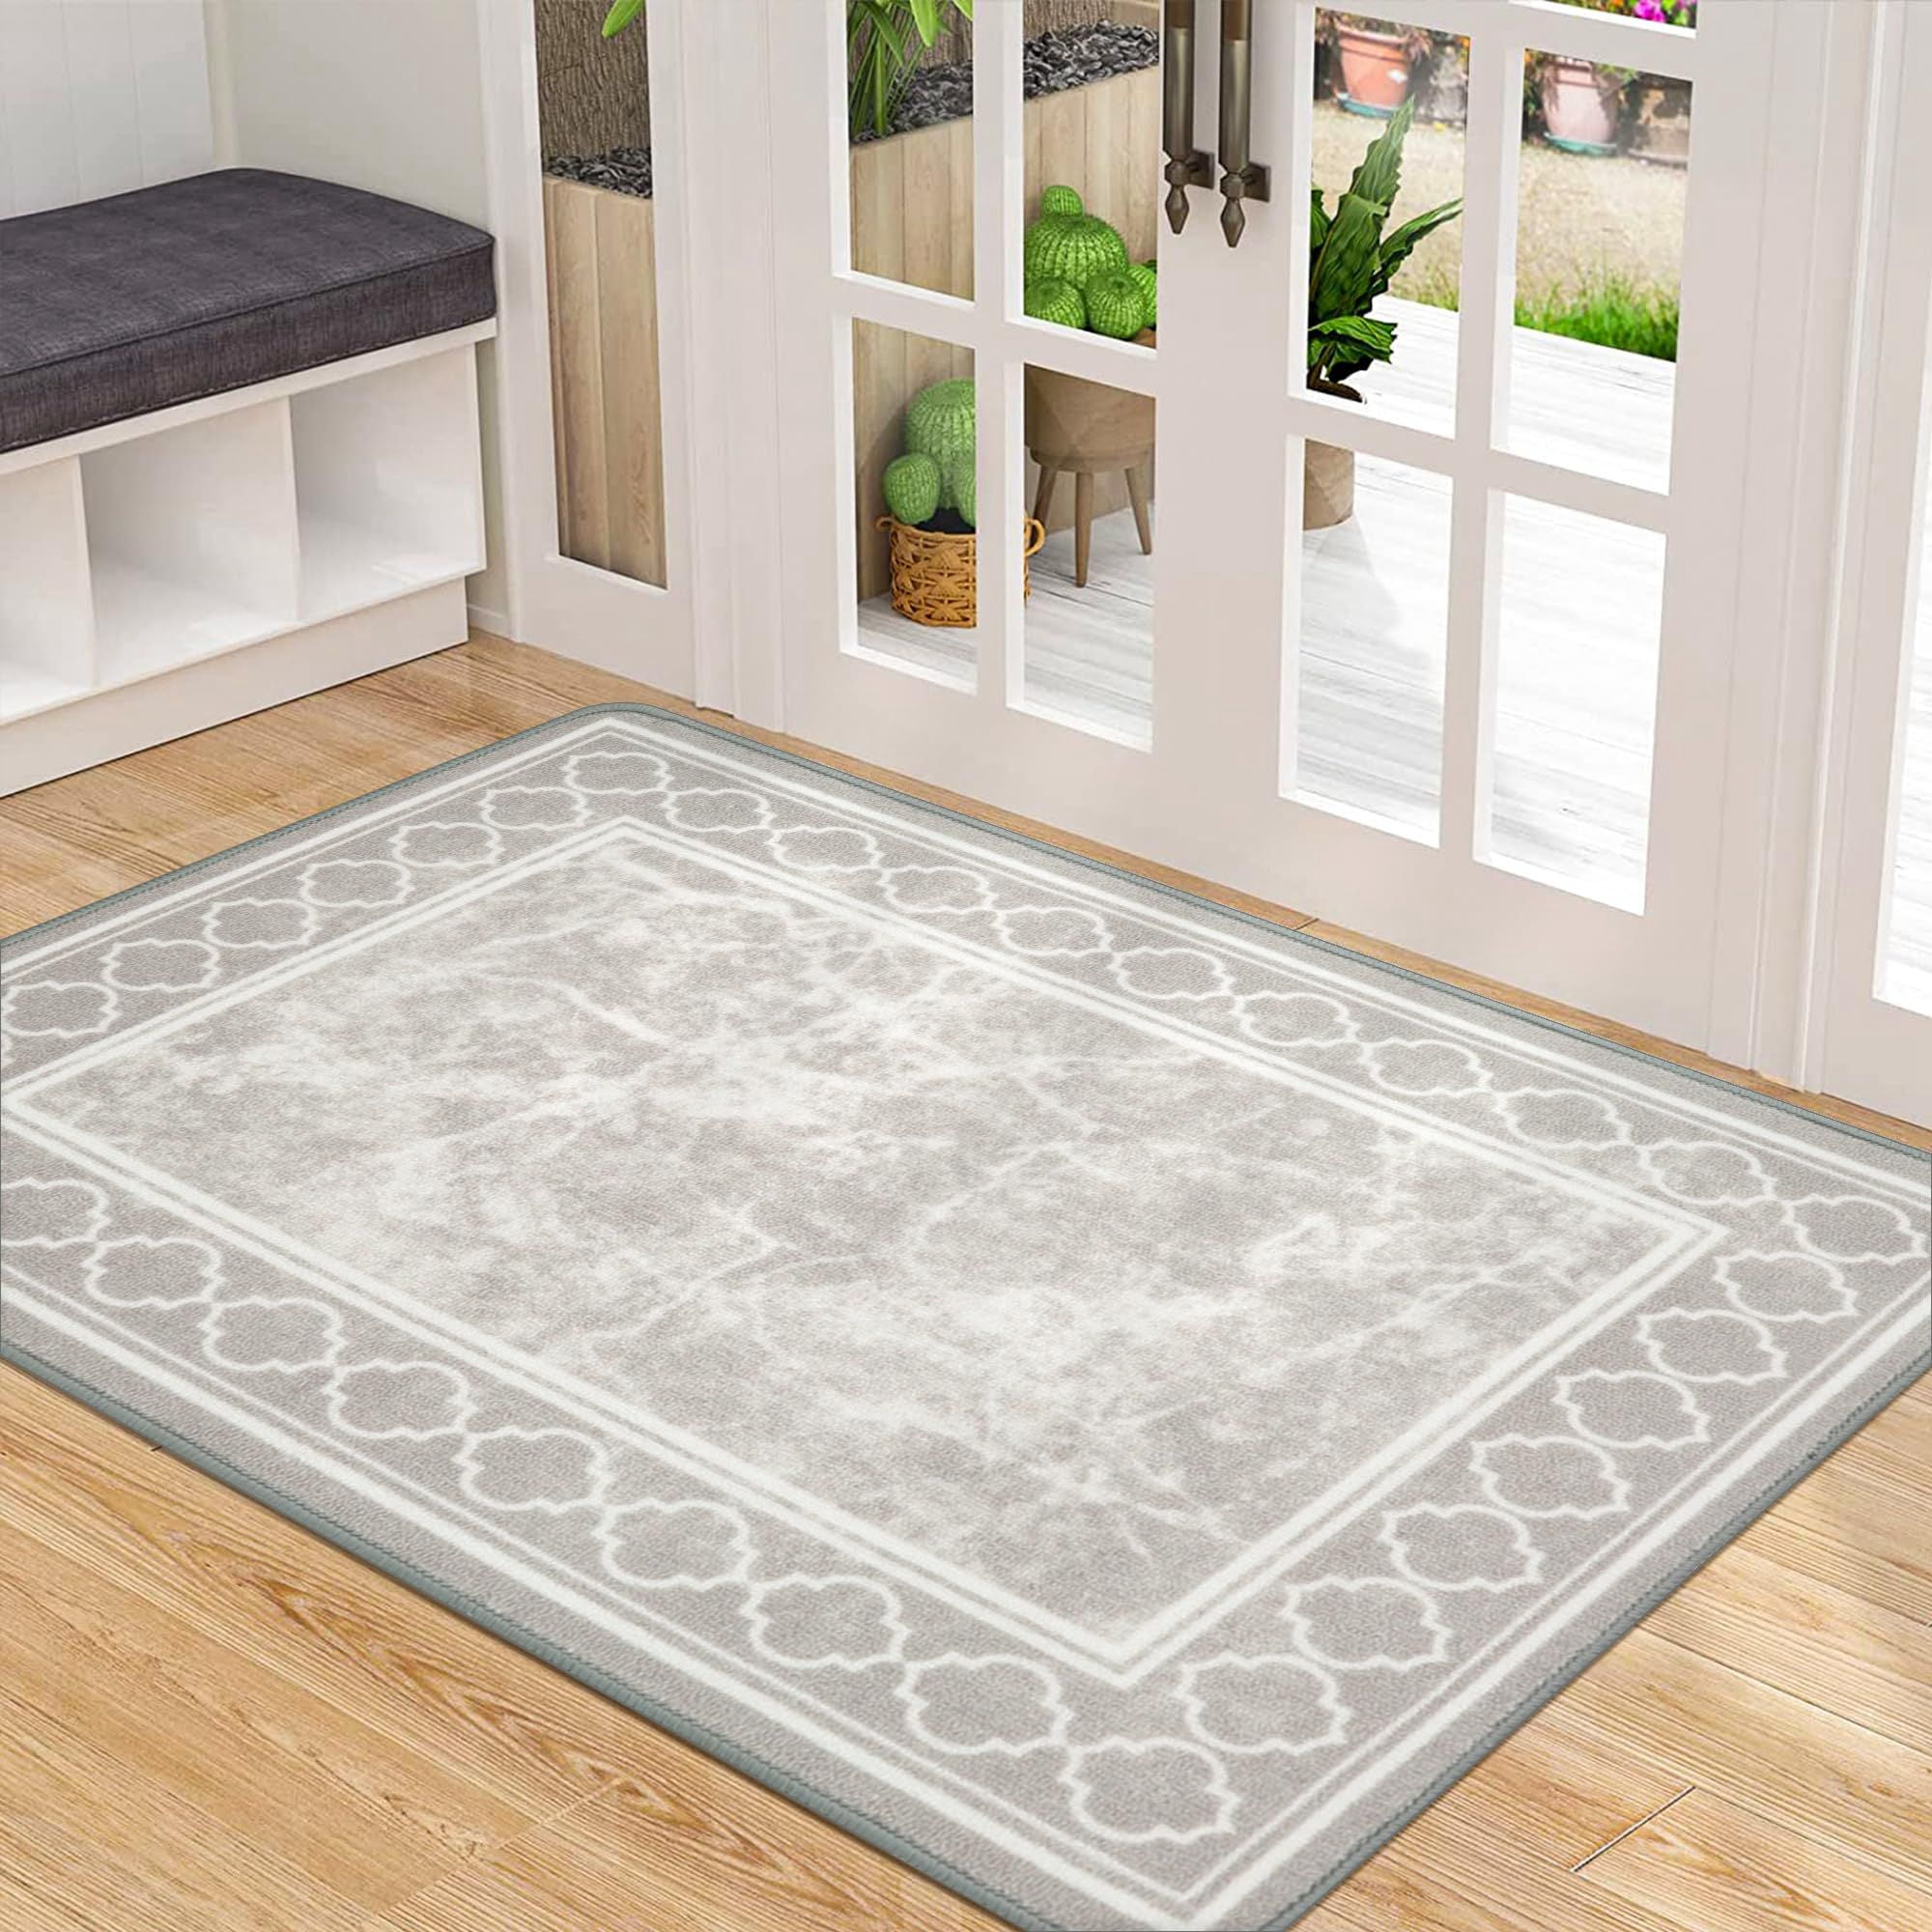 Lahome Geometric Kitchen Mat 2x3 Washable Area Rugs Small Throw Entryway  Rug Non-Slip Kitchen Mats for Floor，Indoor Door Mats for Entry, Accent